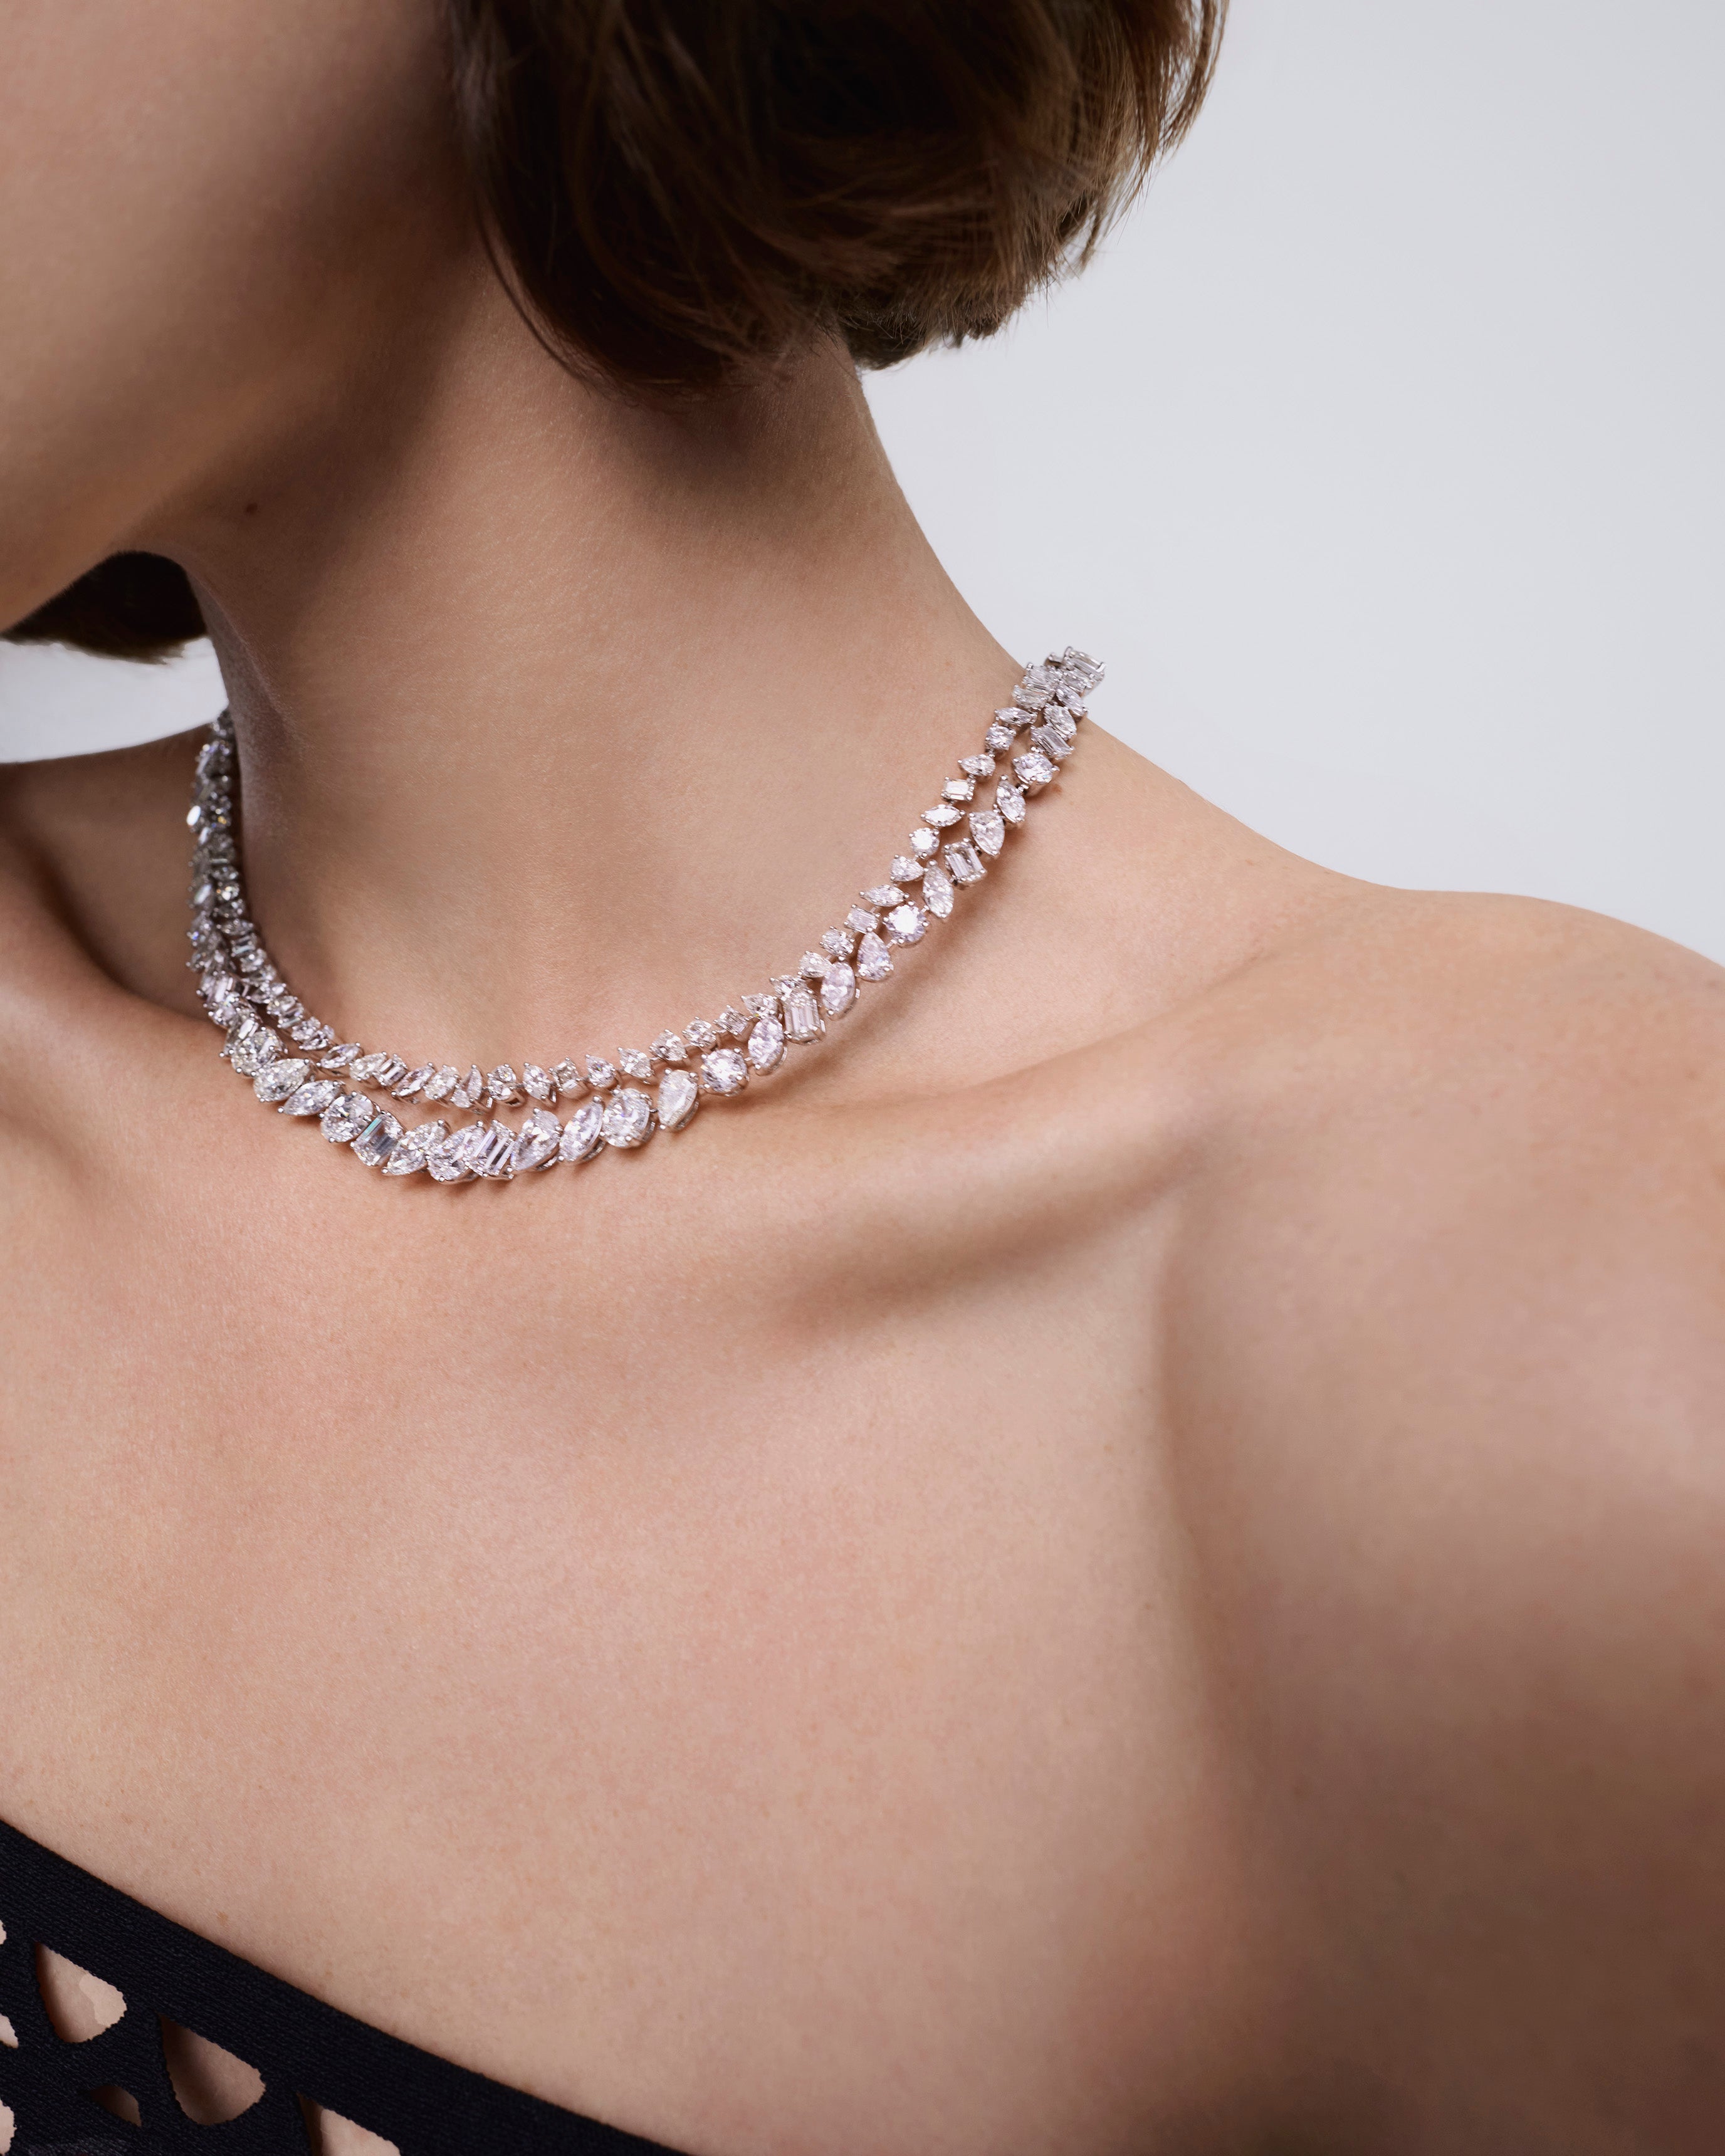 This $55 Million Diamond Necklace Set a World Record 10 Years Ago. Now We  Know Who Bought It.